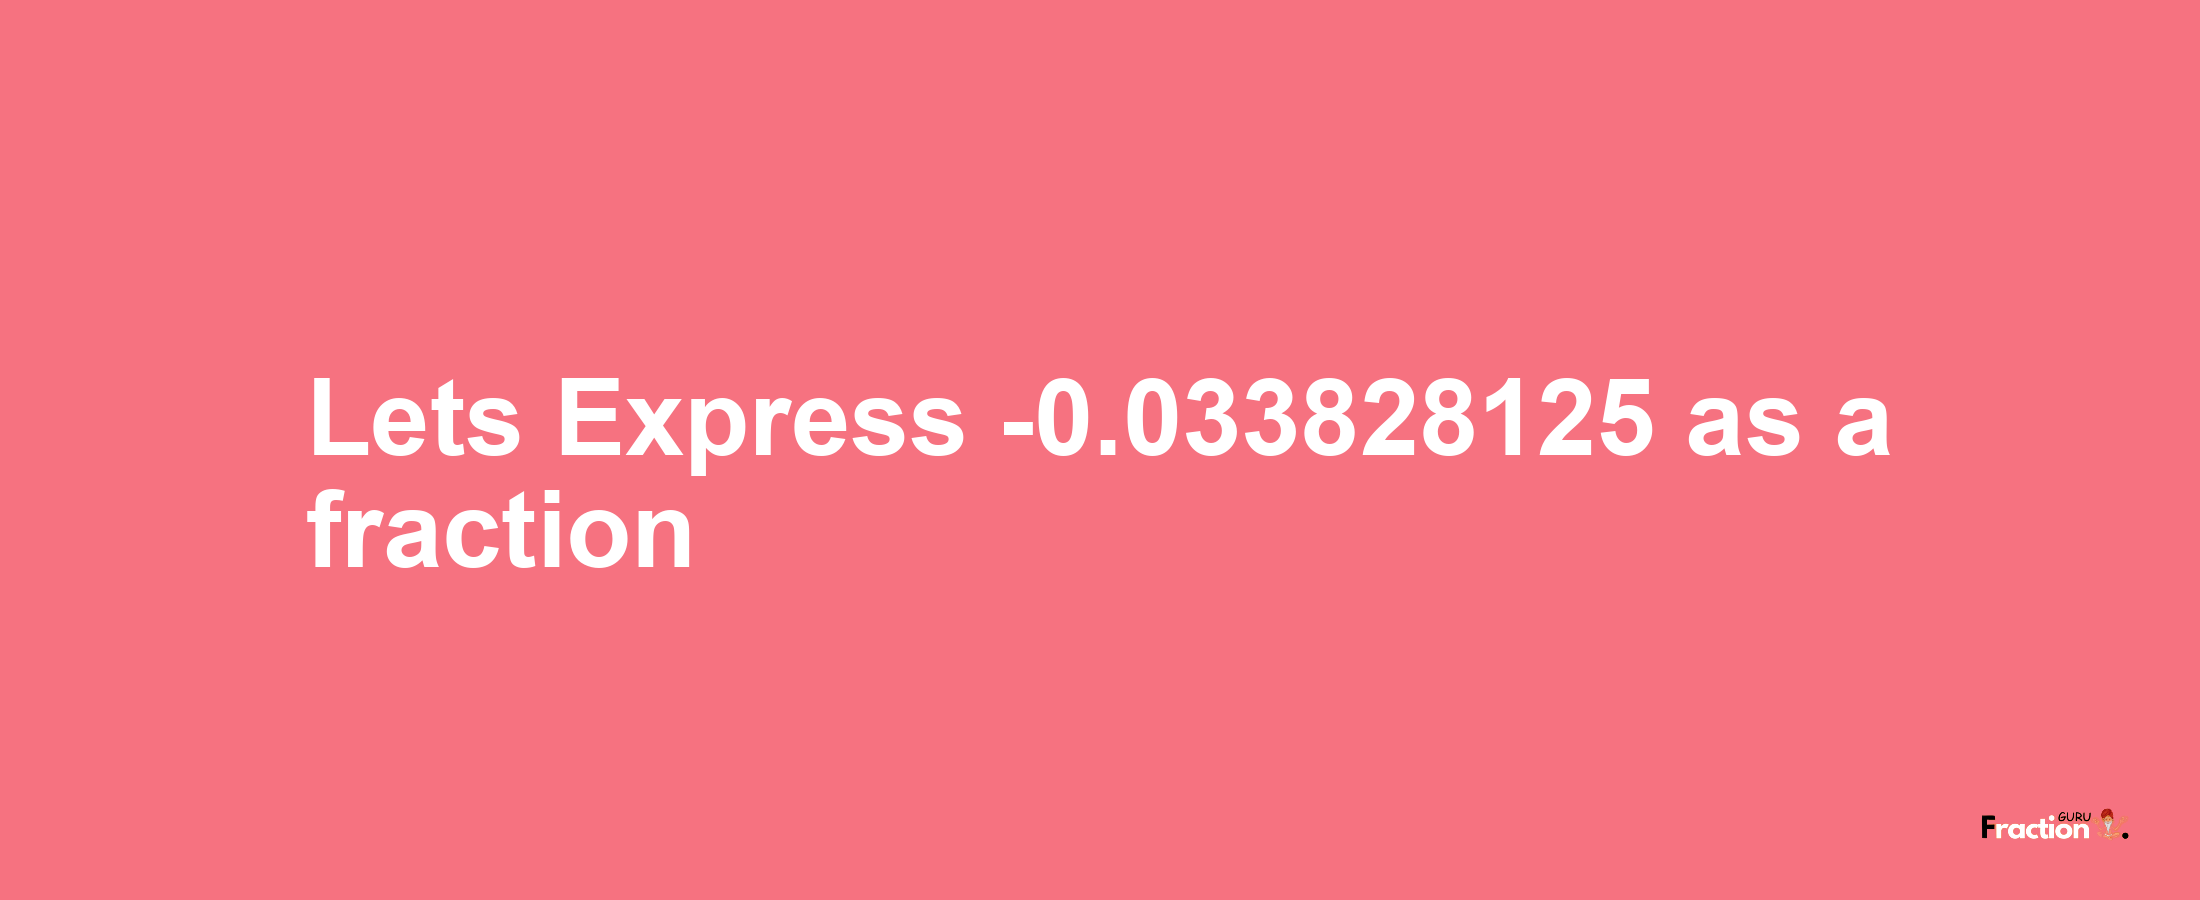 Lets Express -0.033828125 as afraction